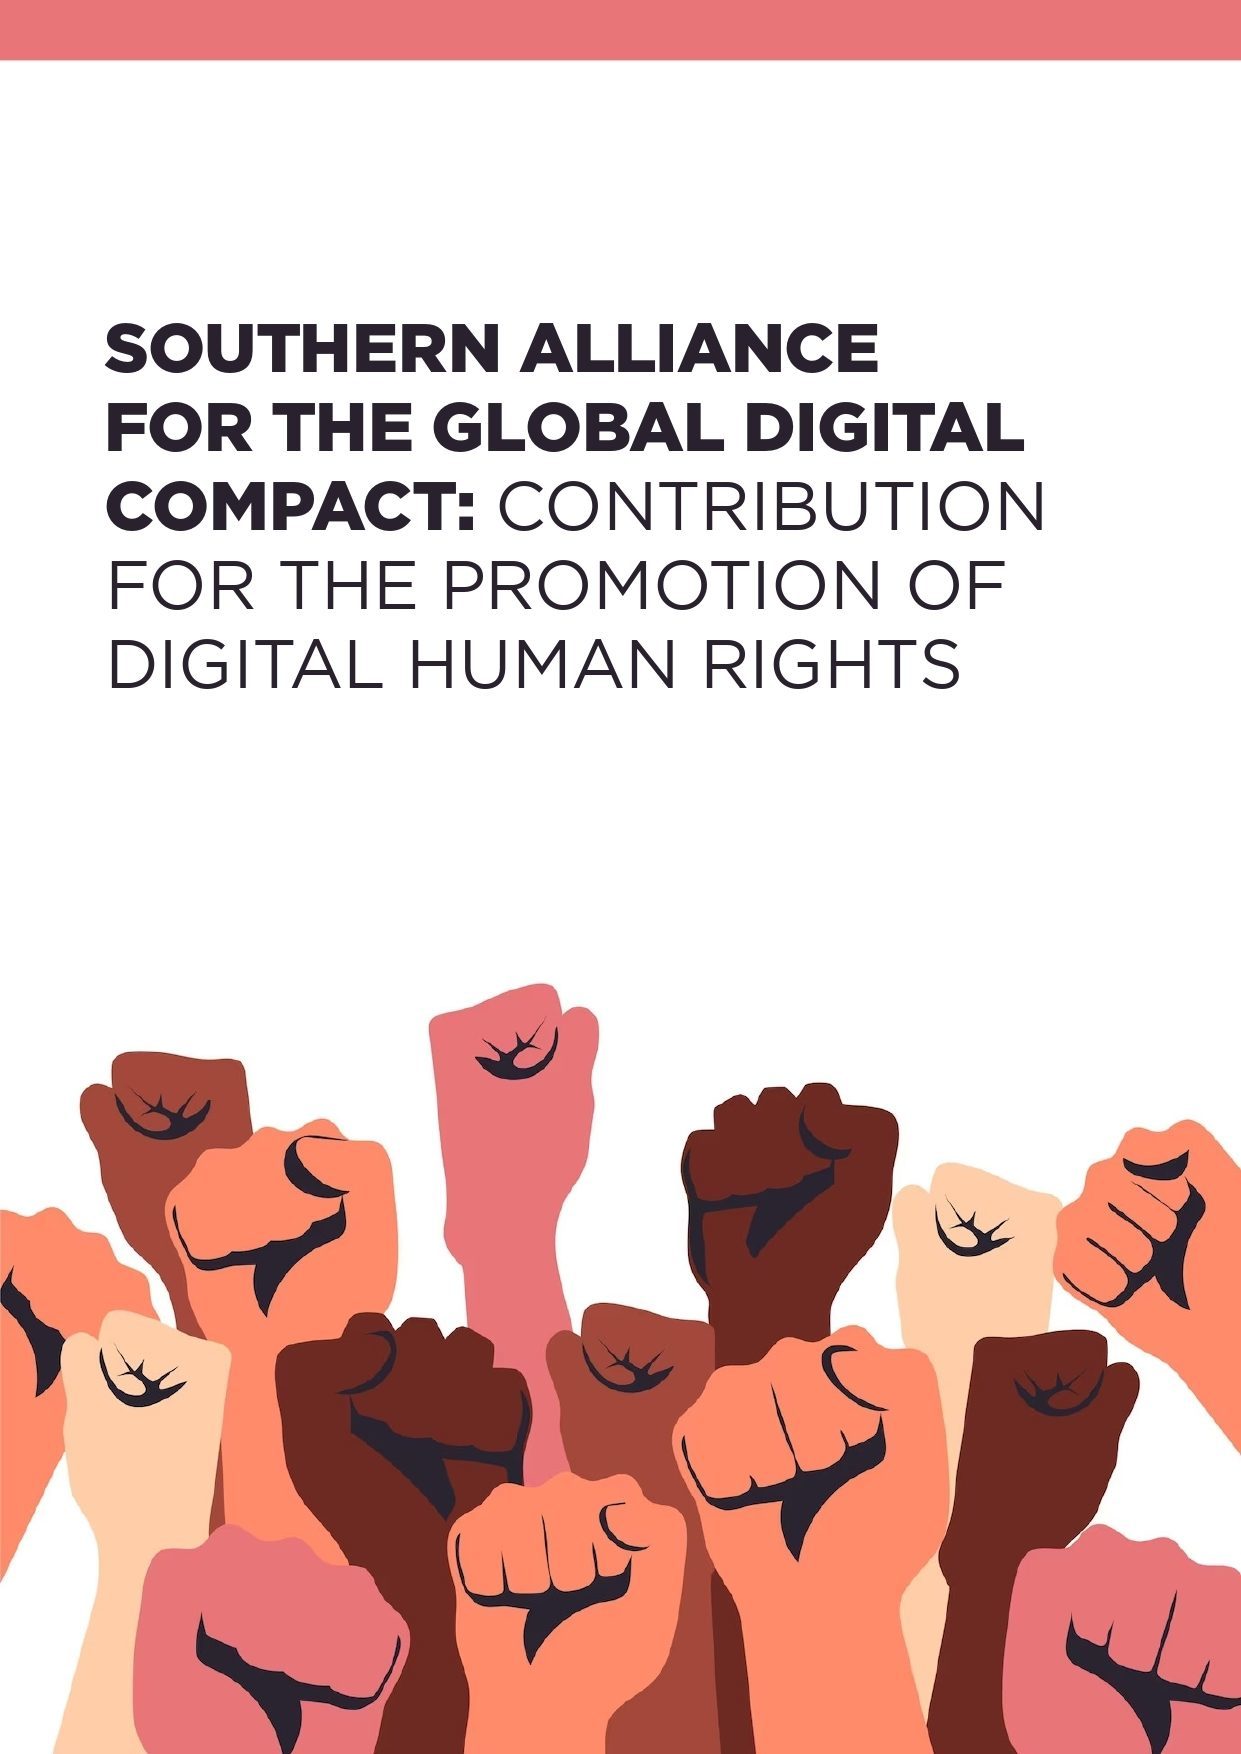 http://Southern%20Alliance%20for%20the%20Global%20Digital%20Compact